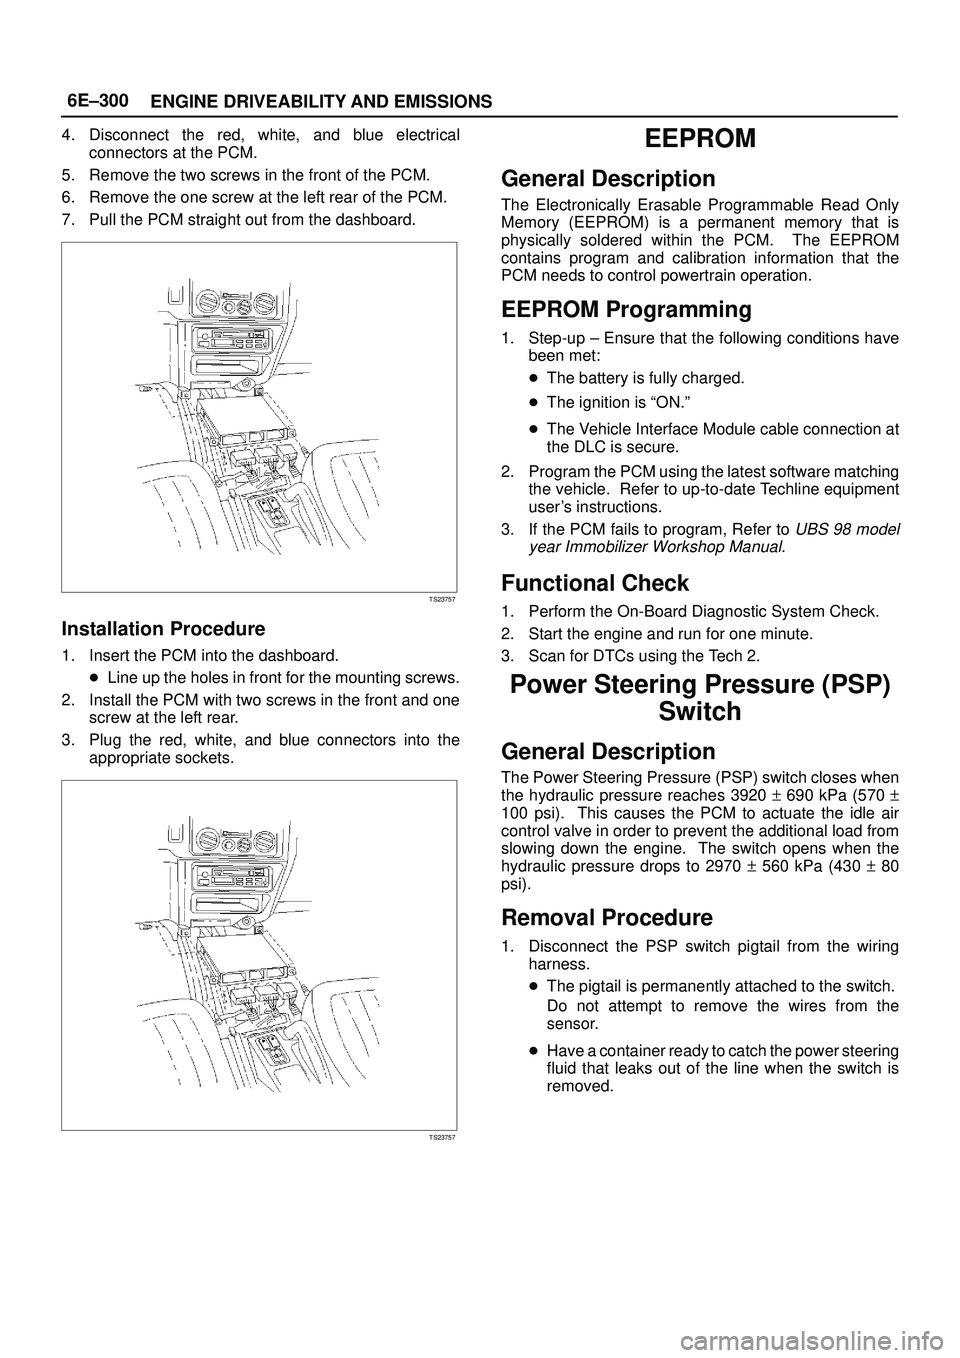 ISUZU TROOPER 1998  Service Repair Manual 6E±300
ENGINE DRIVEABILITY AND EMISSIONS
4. Disconnect the red, white, and blue electrical
connectors at the PCM.
5. Remove the two screws in the front of the PCM.
6. Remove the one screw at the left